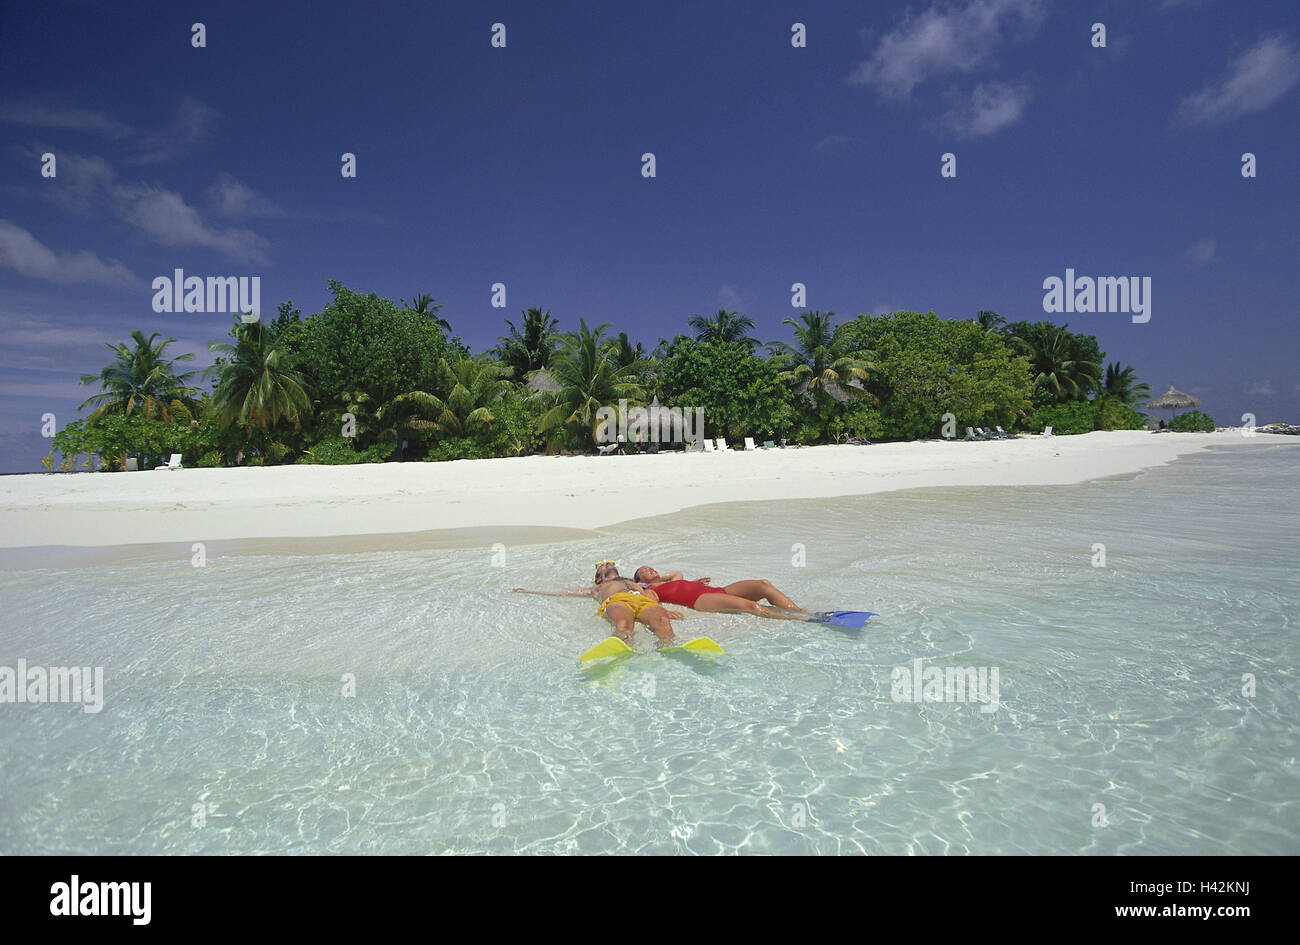 Beach, couple, young, sea, lie, swimming fins, model released, man, woman, person, vacation, sunny, two, people, fun, sportily, lifestyle, together, with each other, falls in love, amuses bath pass, summer, dream vacation, sandy beach, holidays, leisure time, smile, water, fins, recreation, rest, island, palms, beach, the Maldives, Stock Photo